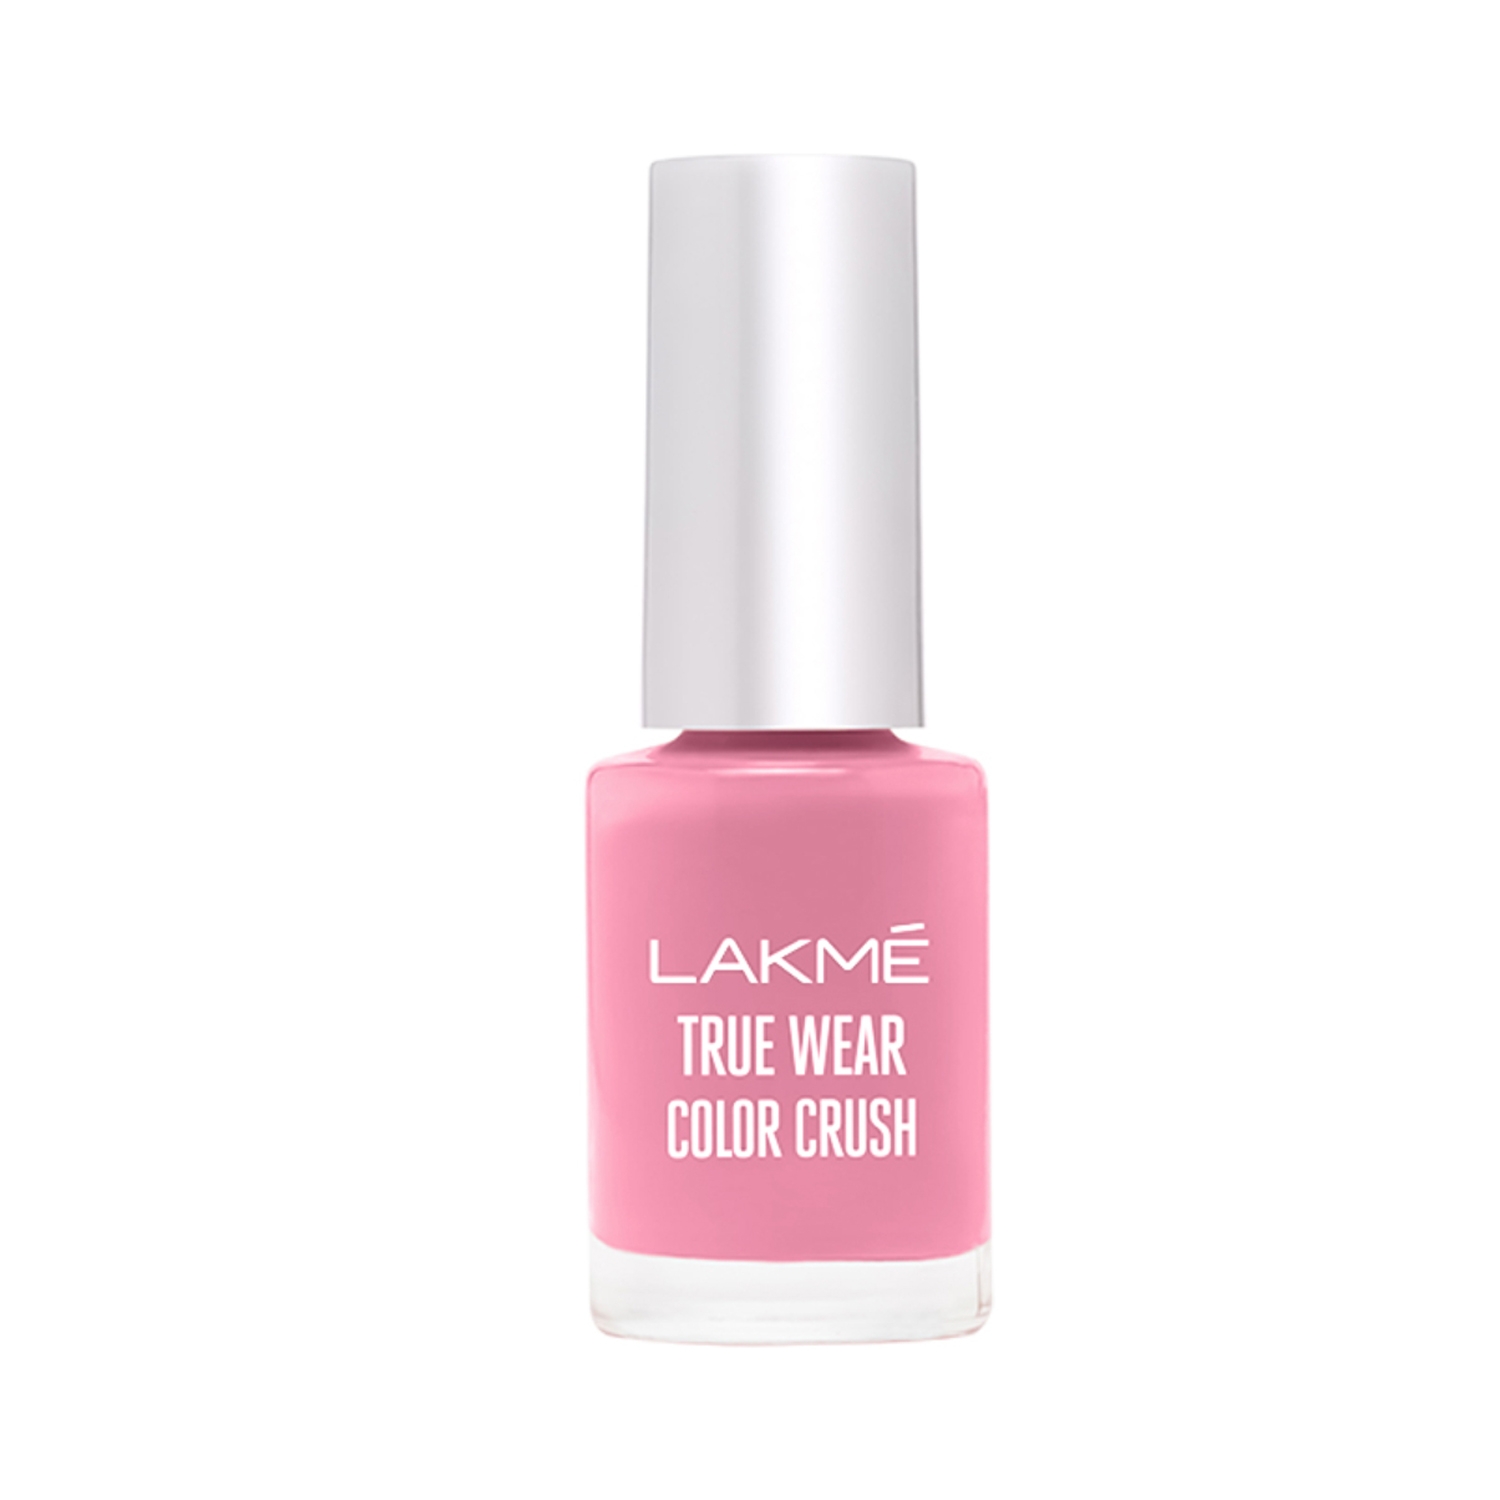 Buy Lakmé 9 To 5 Primer + Glossy Finish Nail Colour, Brownlatte, 6Ml Online  at Low Prices in India - Amazon.in